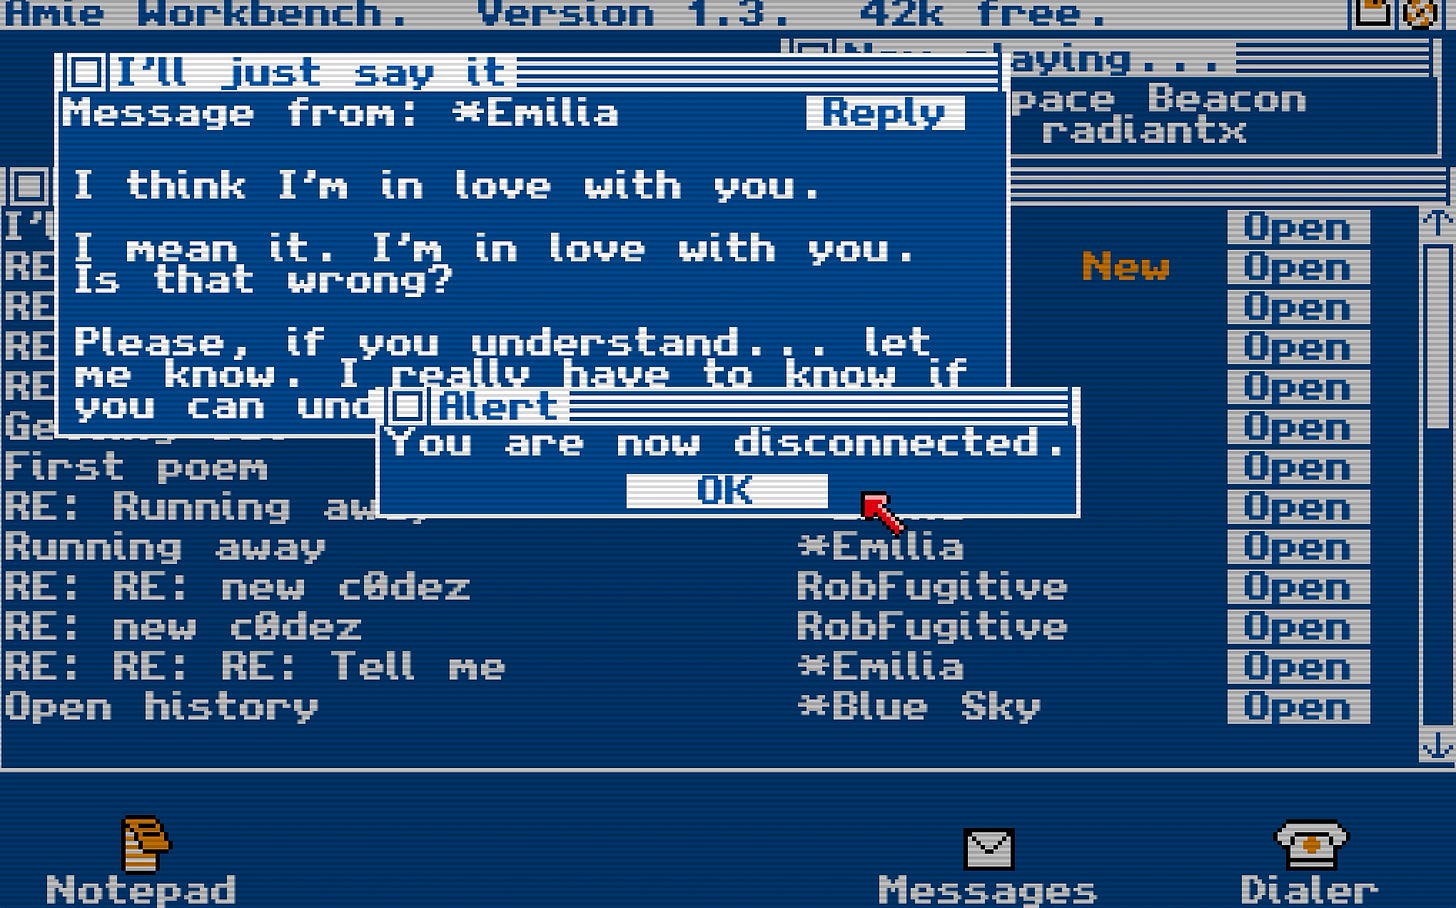 A screenshot from the retro interface of Digital: A Love Story, showing a message window with a love confession from Emilia overlaid by a pop-up reading "You are now disconnected."